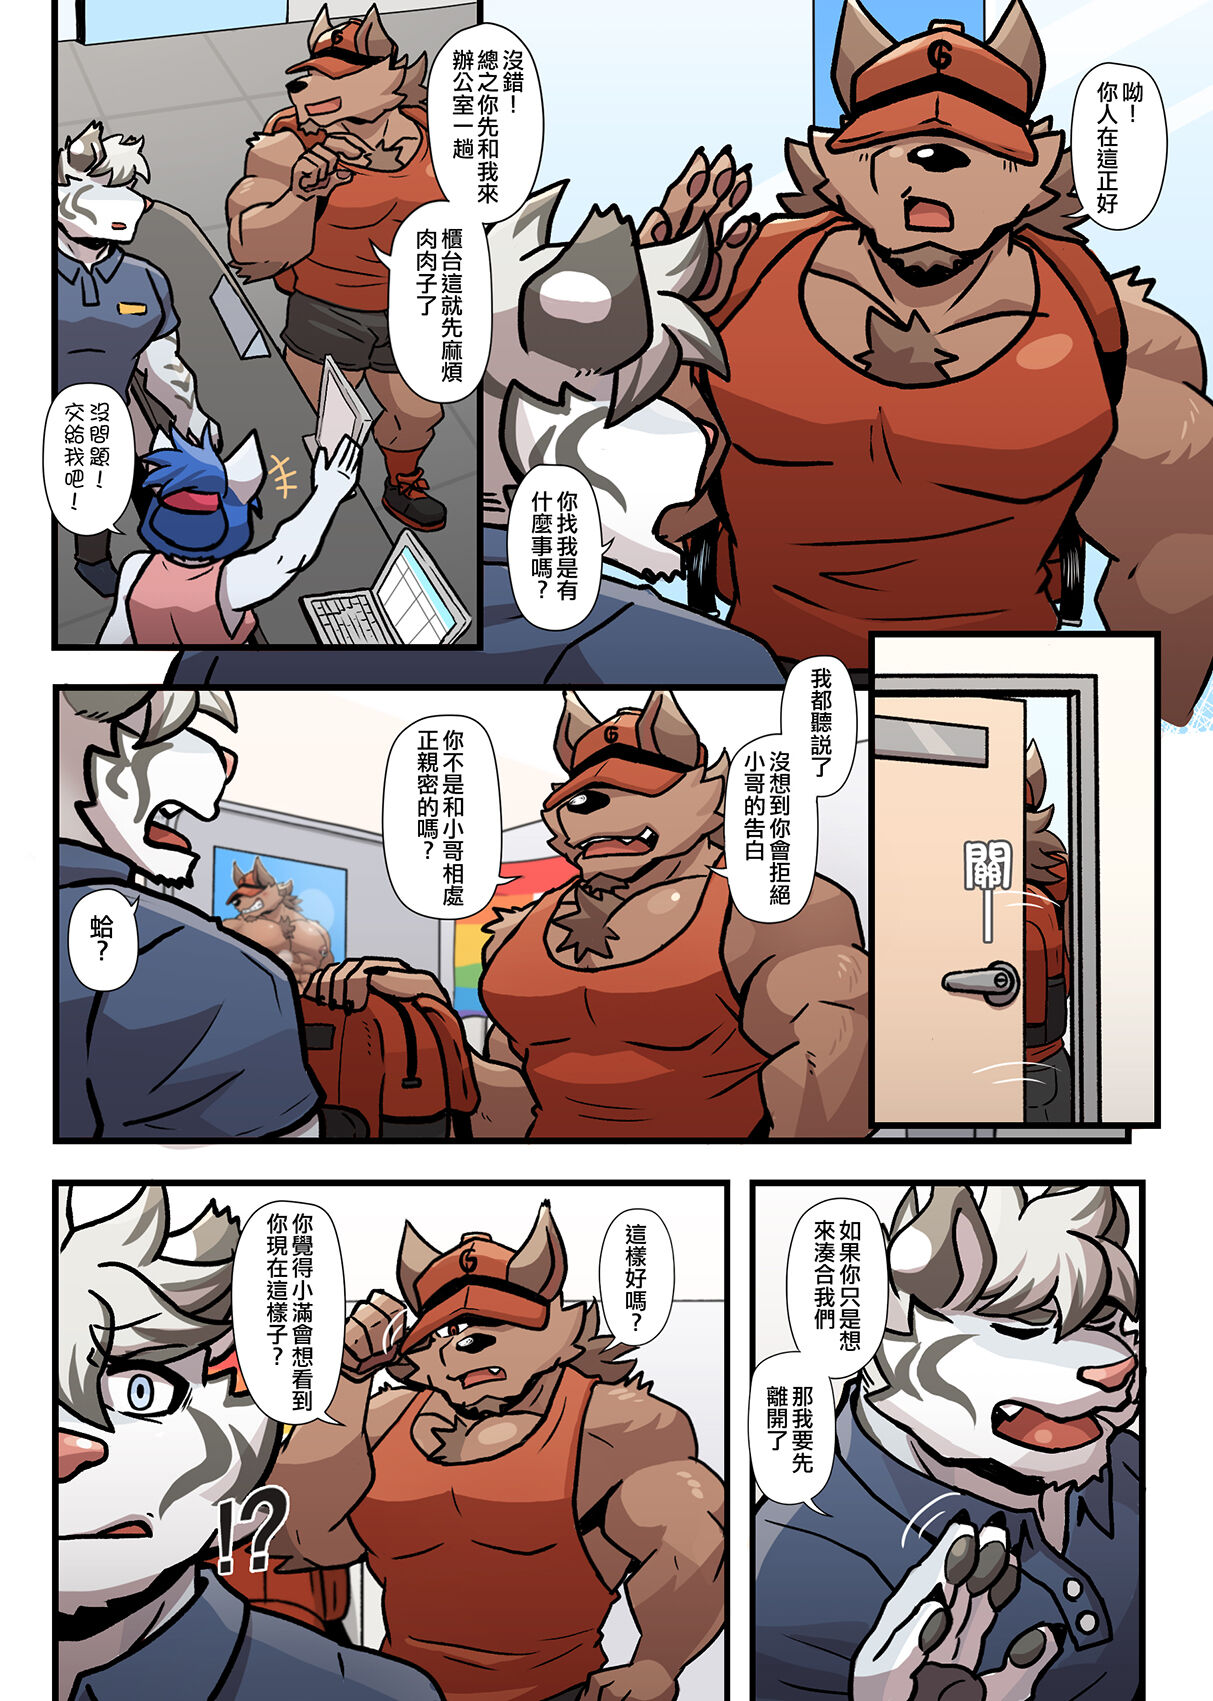 [Ripple Moon] Gym Pals (健身小哥) (Ongoing) [Chinese] [连载中] 